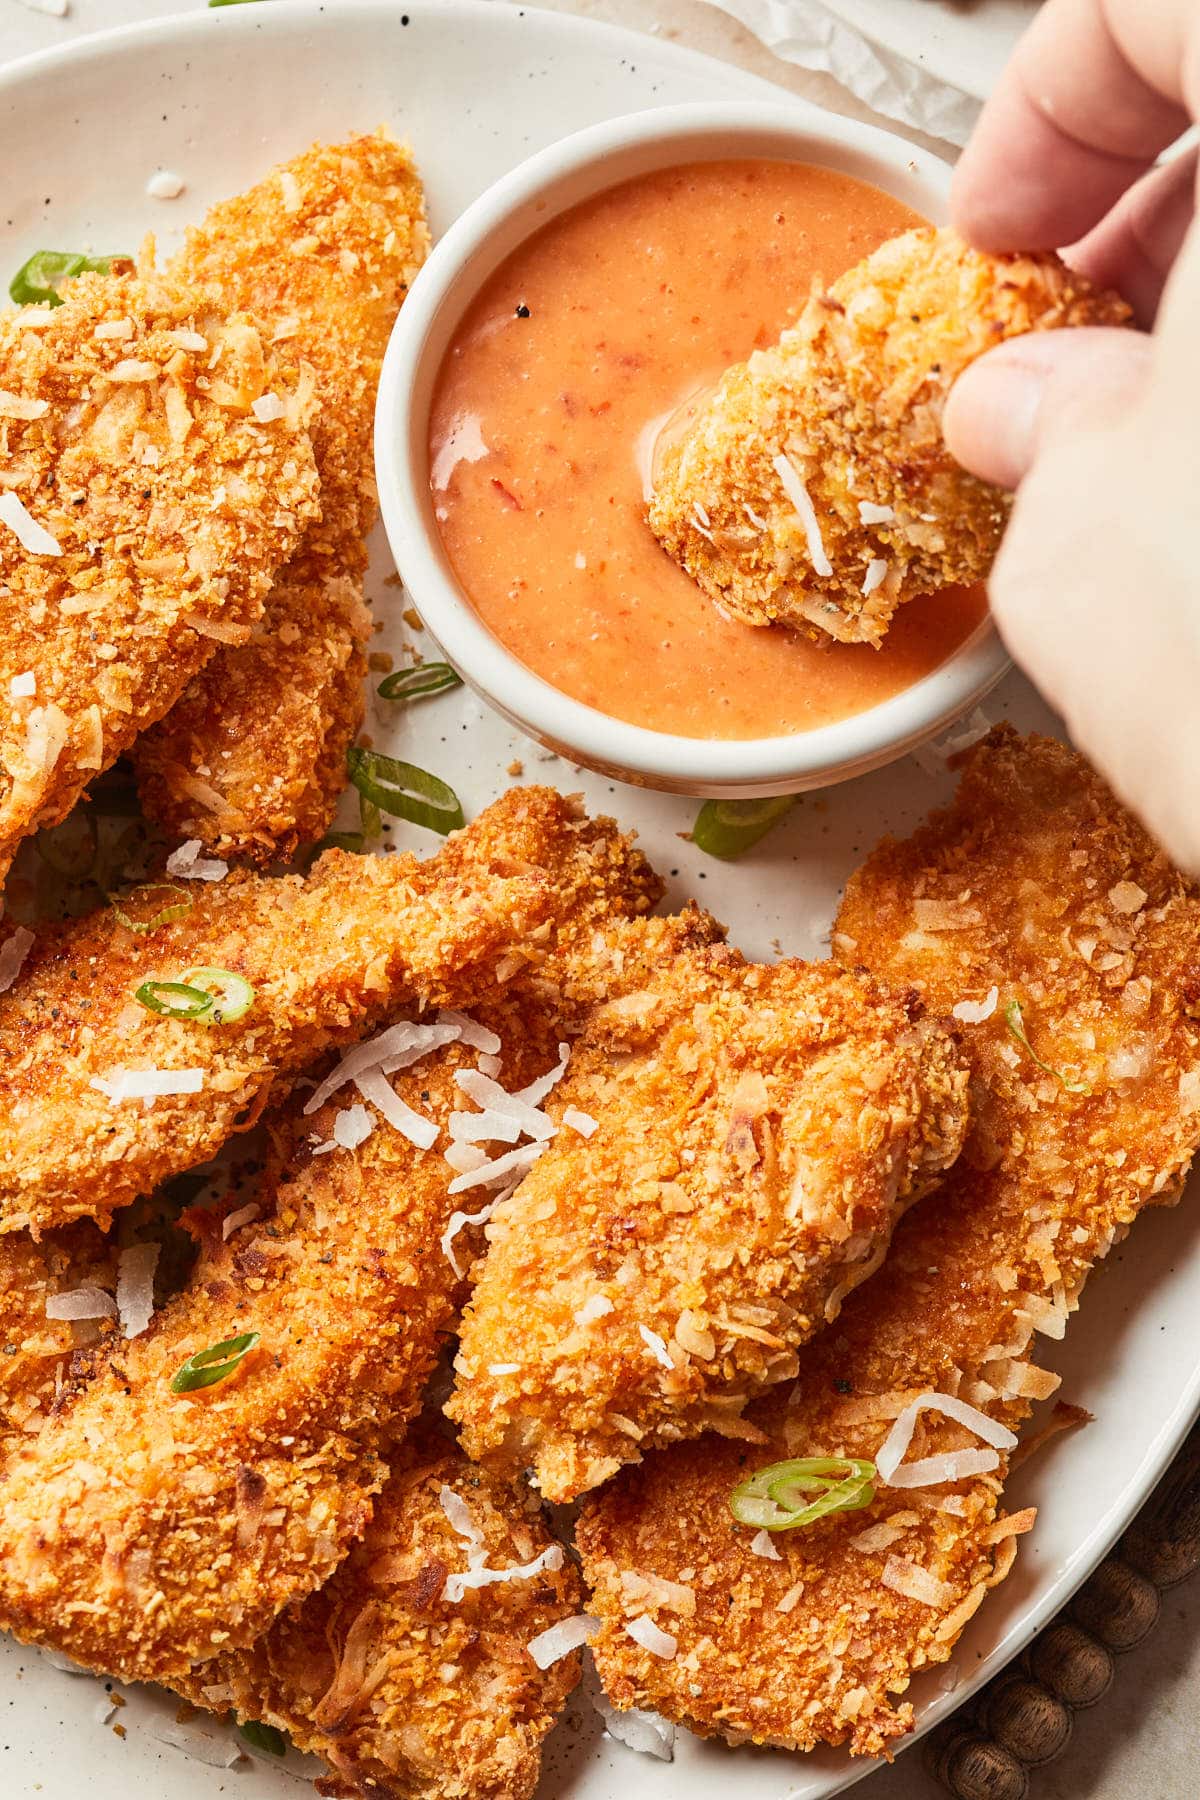 A hand dipping a piece of chicken into a dipping sauce.